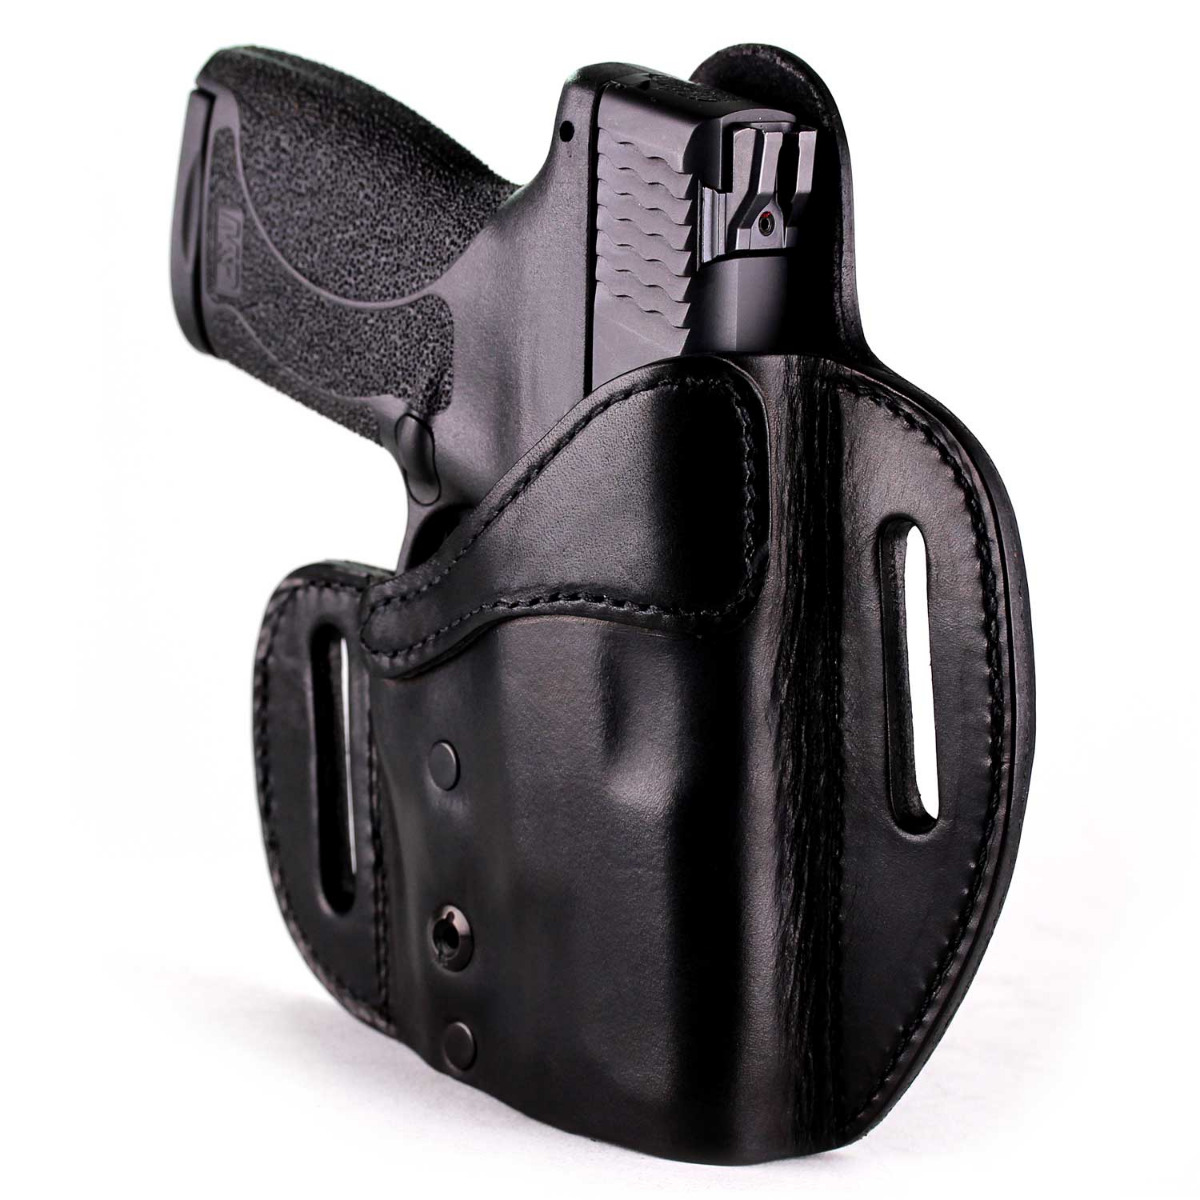 PRO TACTICAL GUN HOLSTER CONCEALED CARRY IWB OWB  DIAMOND BACK DB9 9mm 